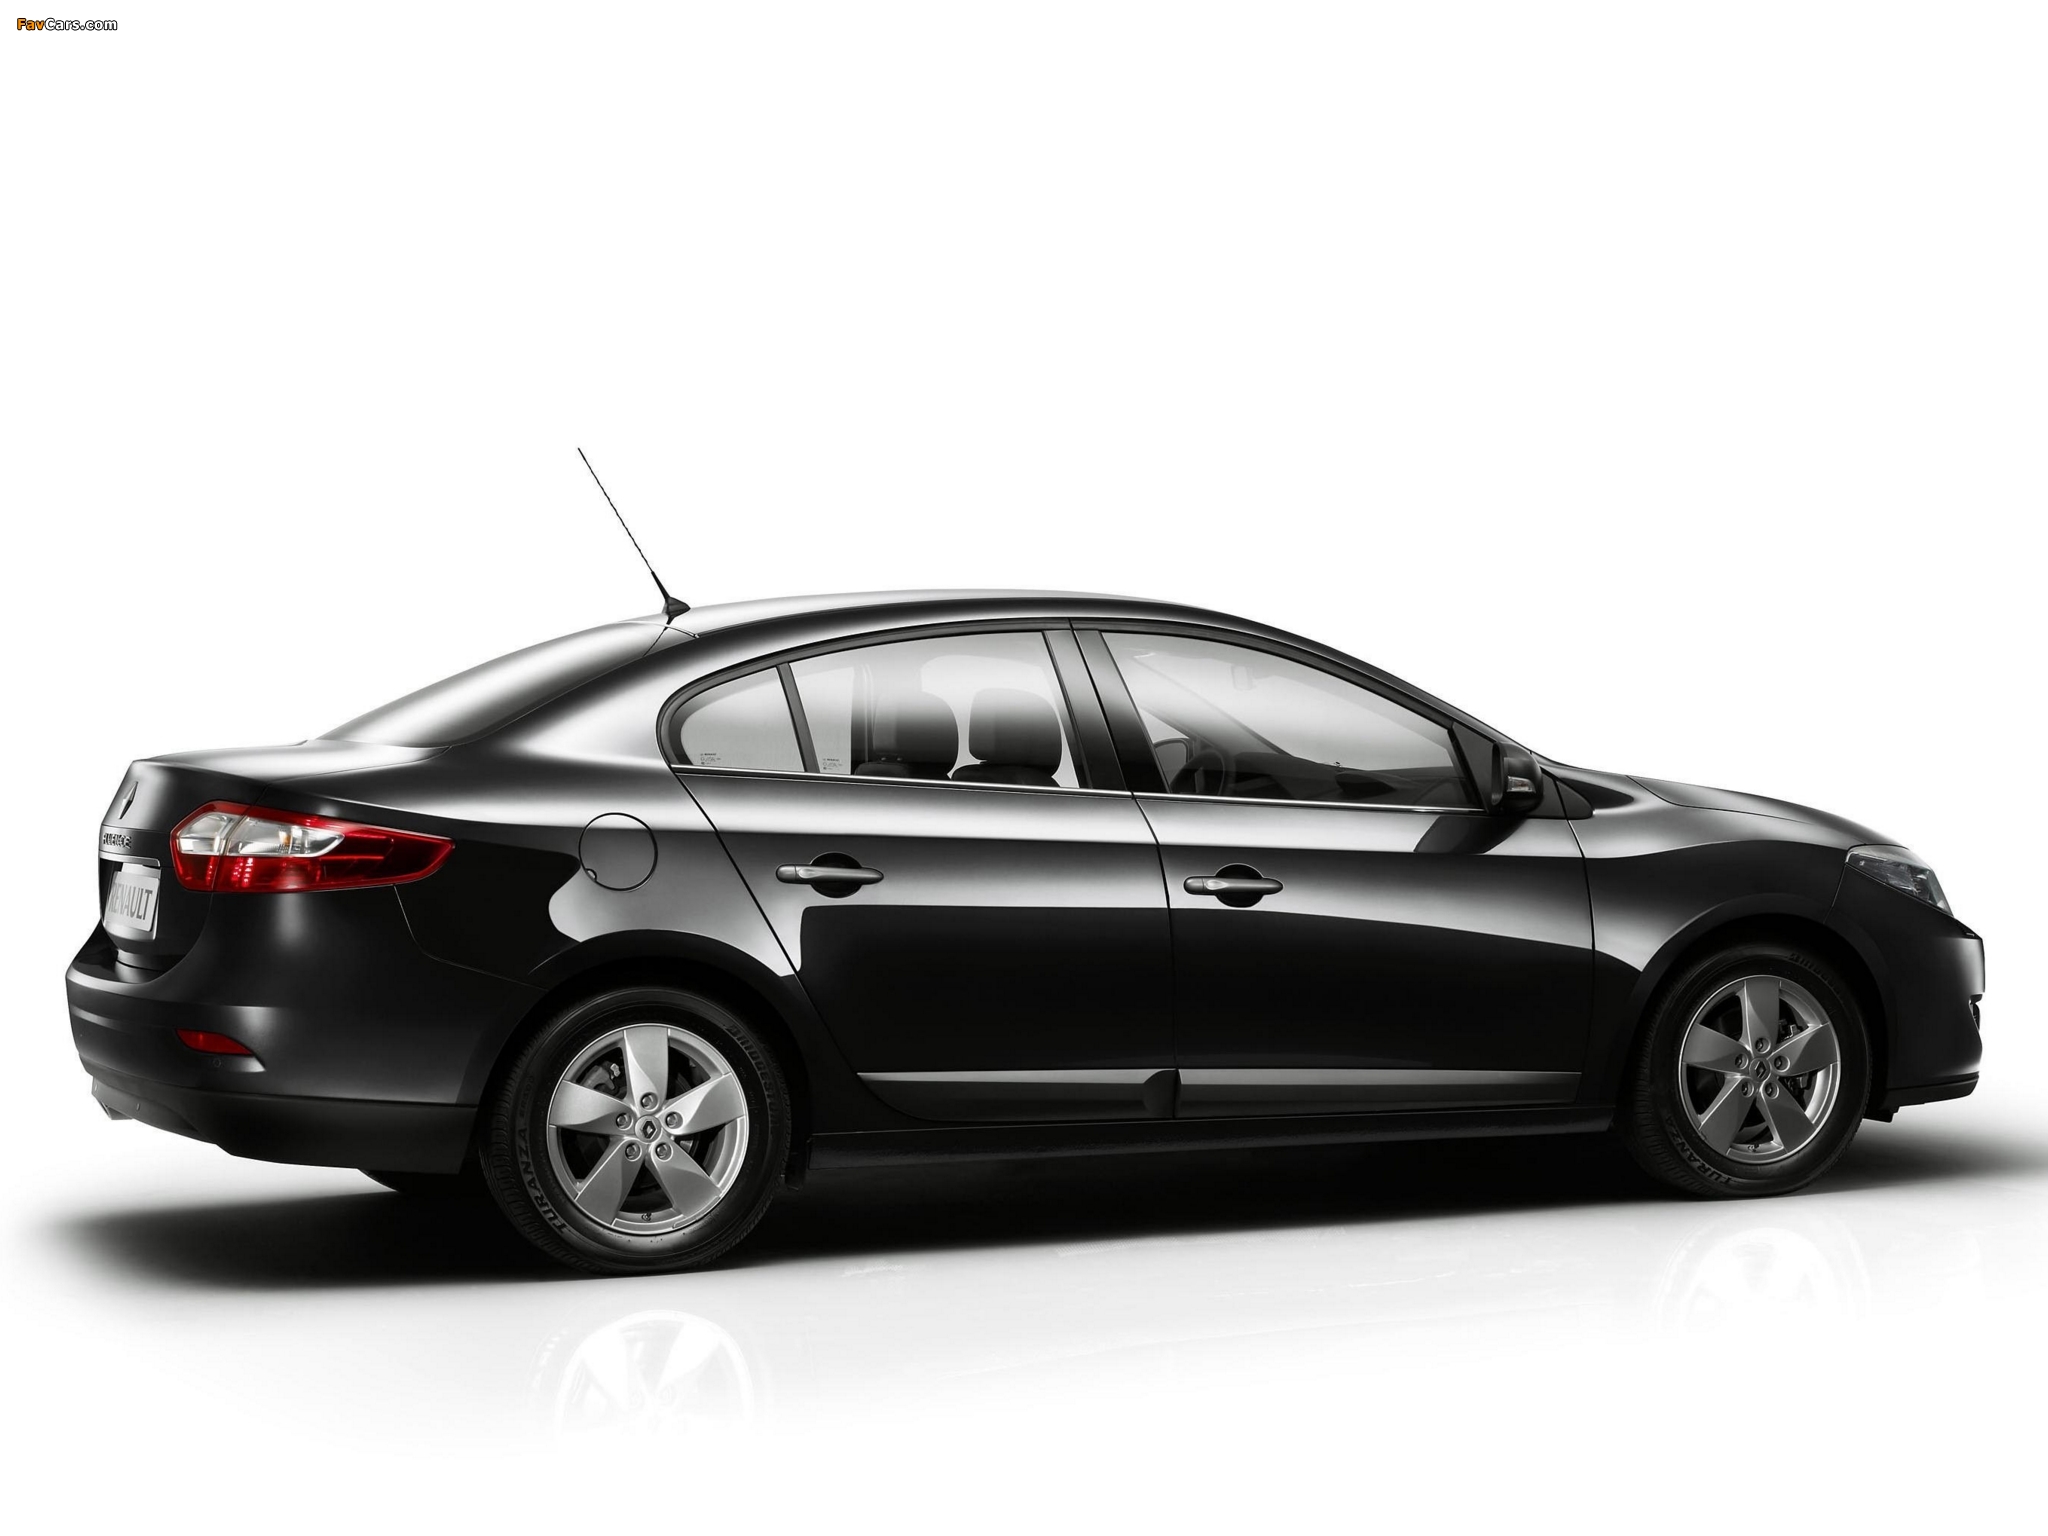 Renault Fluence 2009 pictures (2048 x 1536)